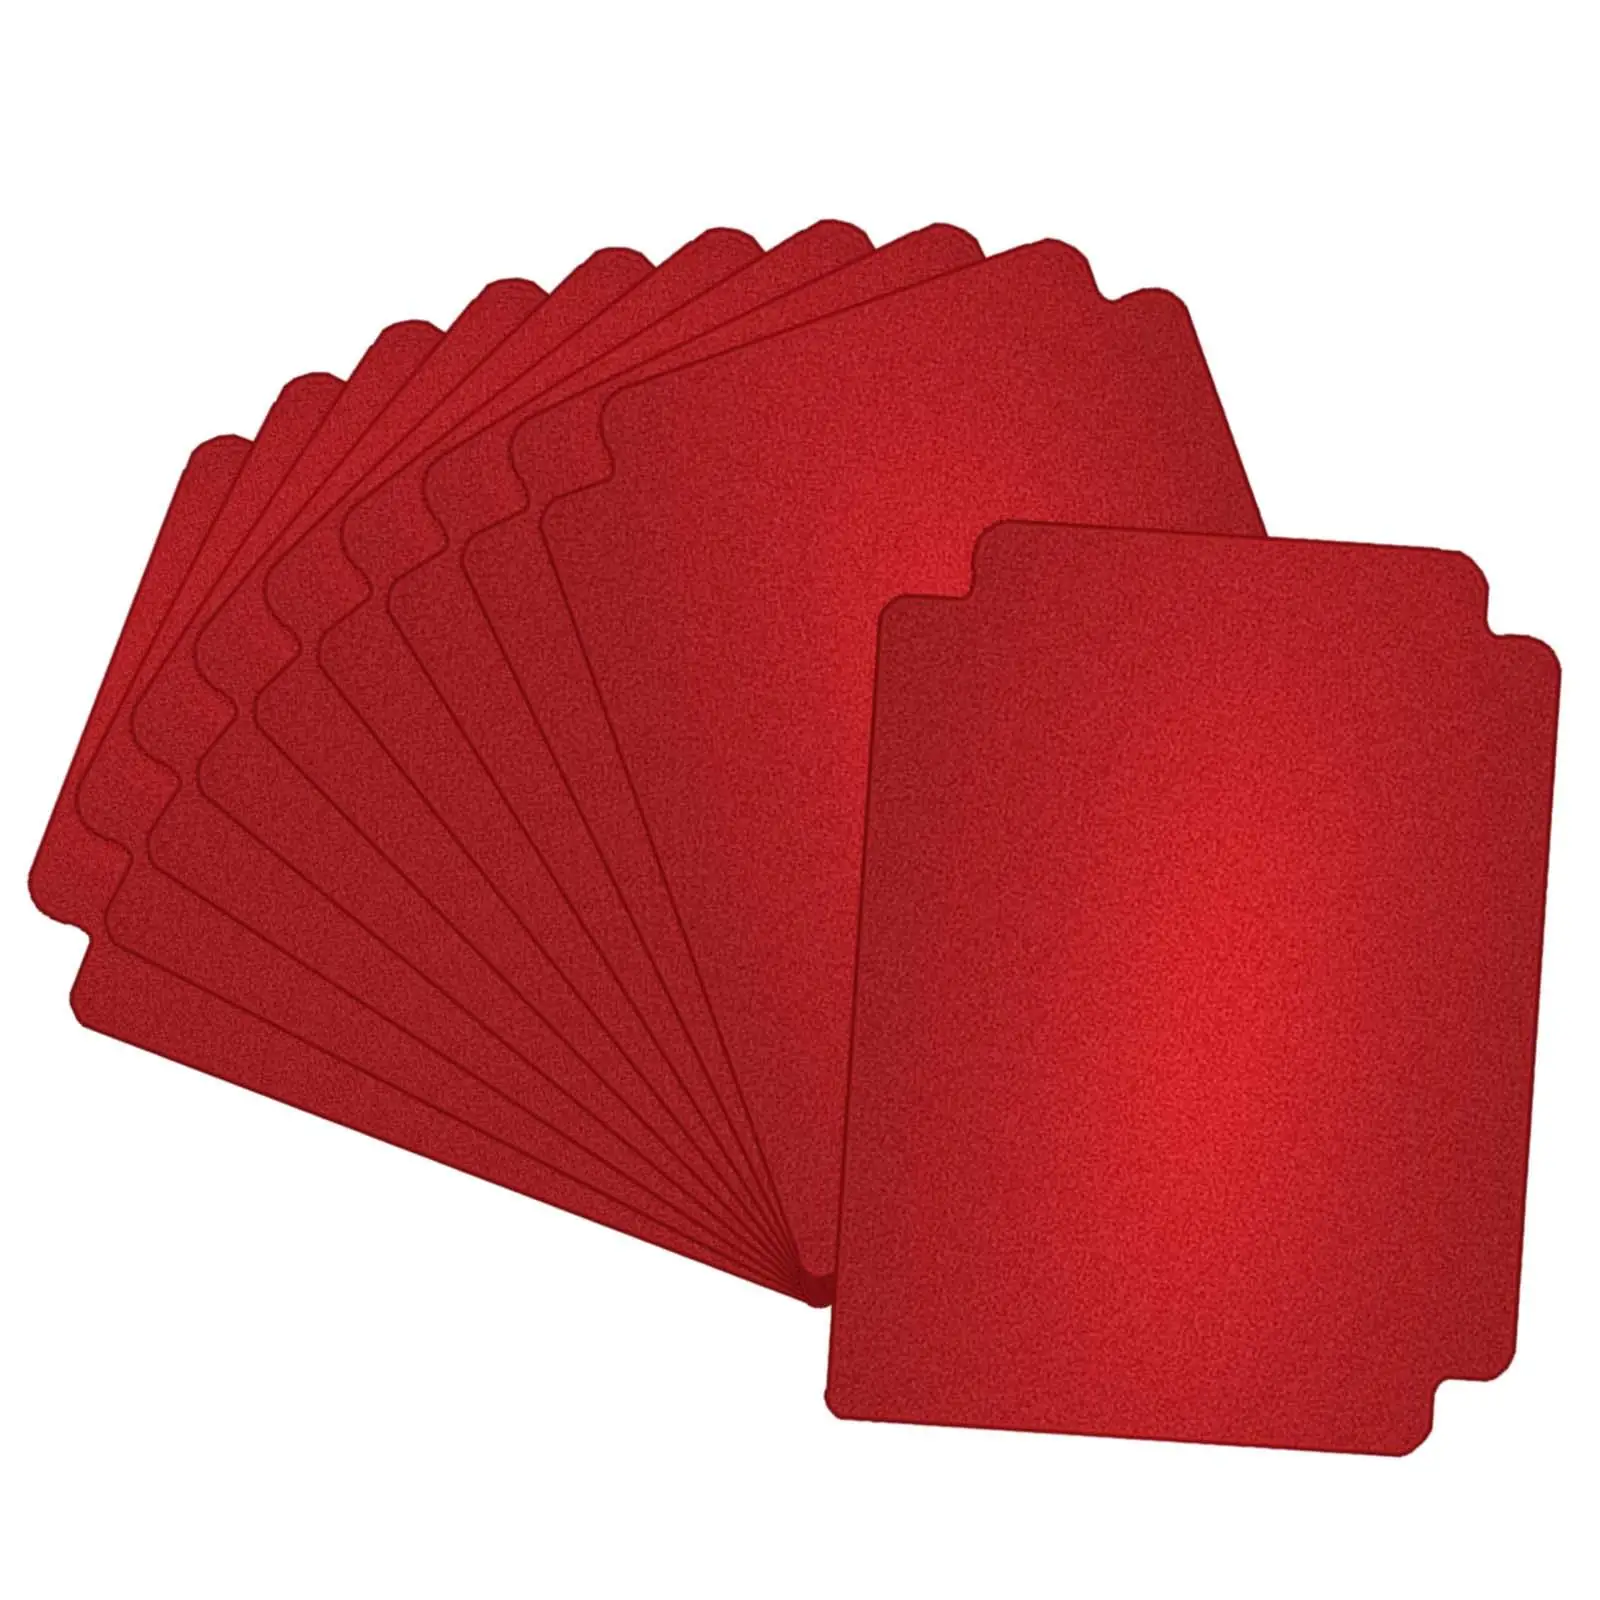 10 Pieces Trading Card Dividers Standard Card Page Dividers for Sports Cards